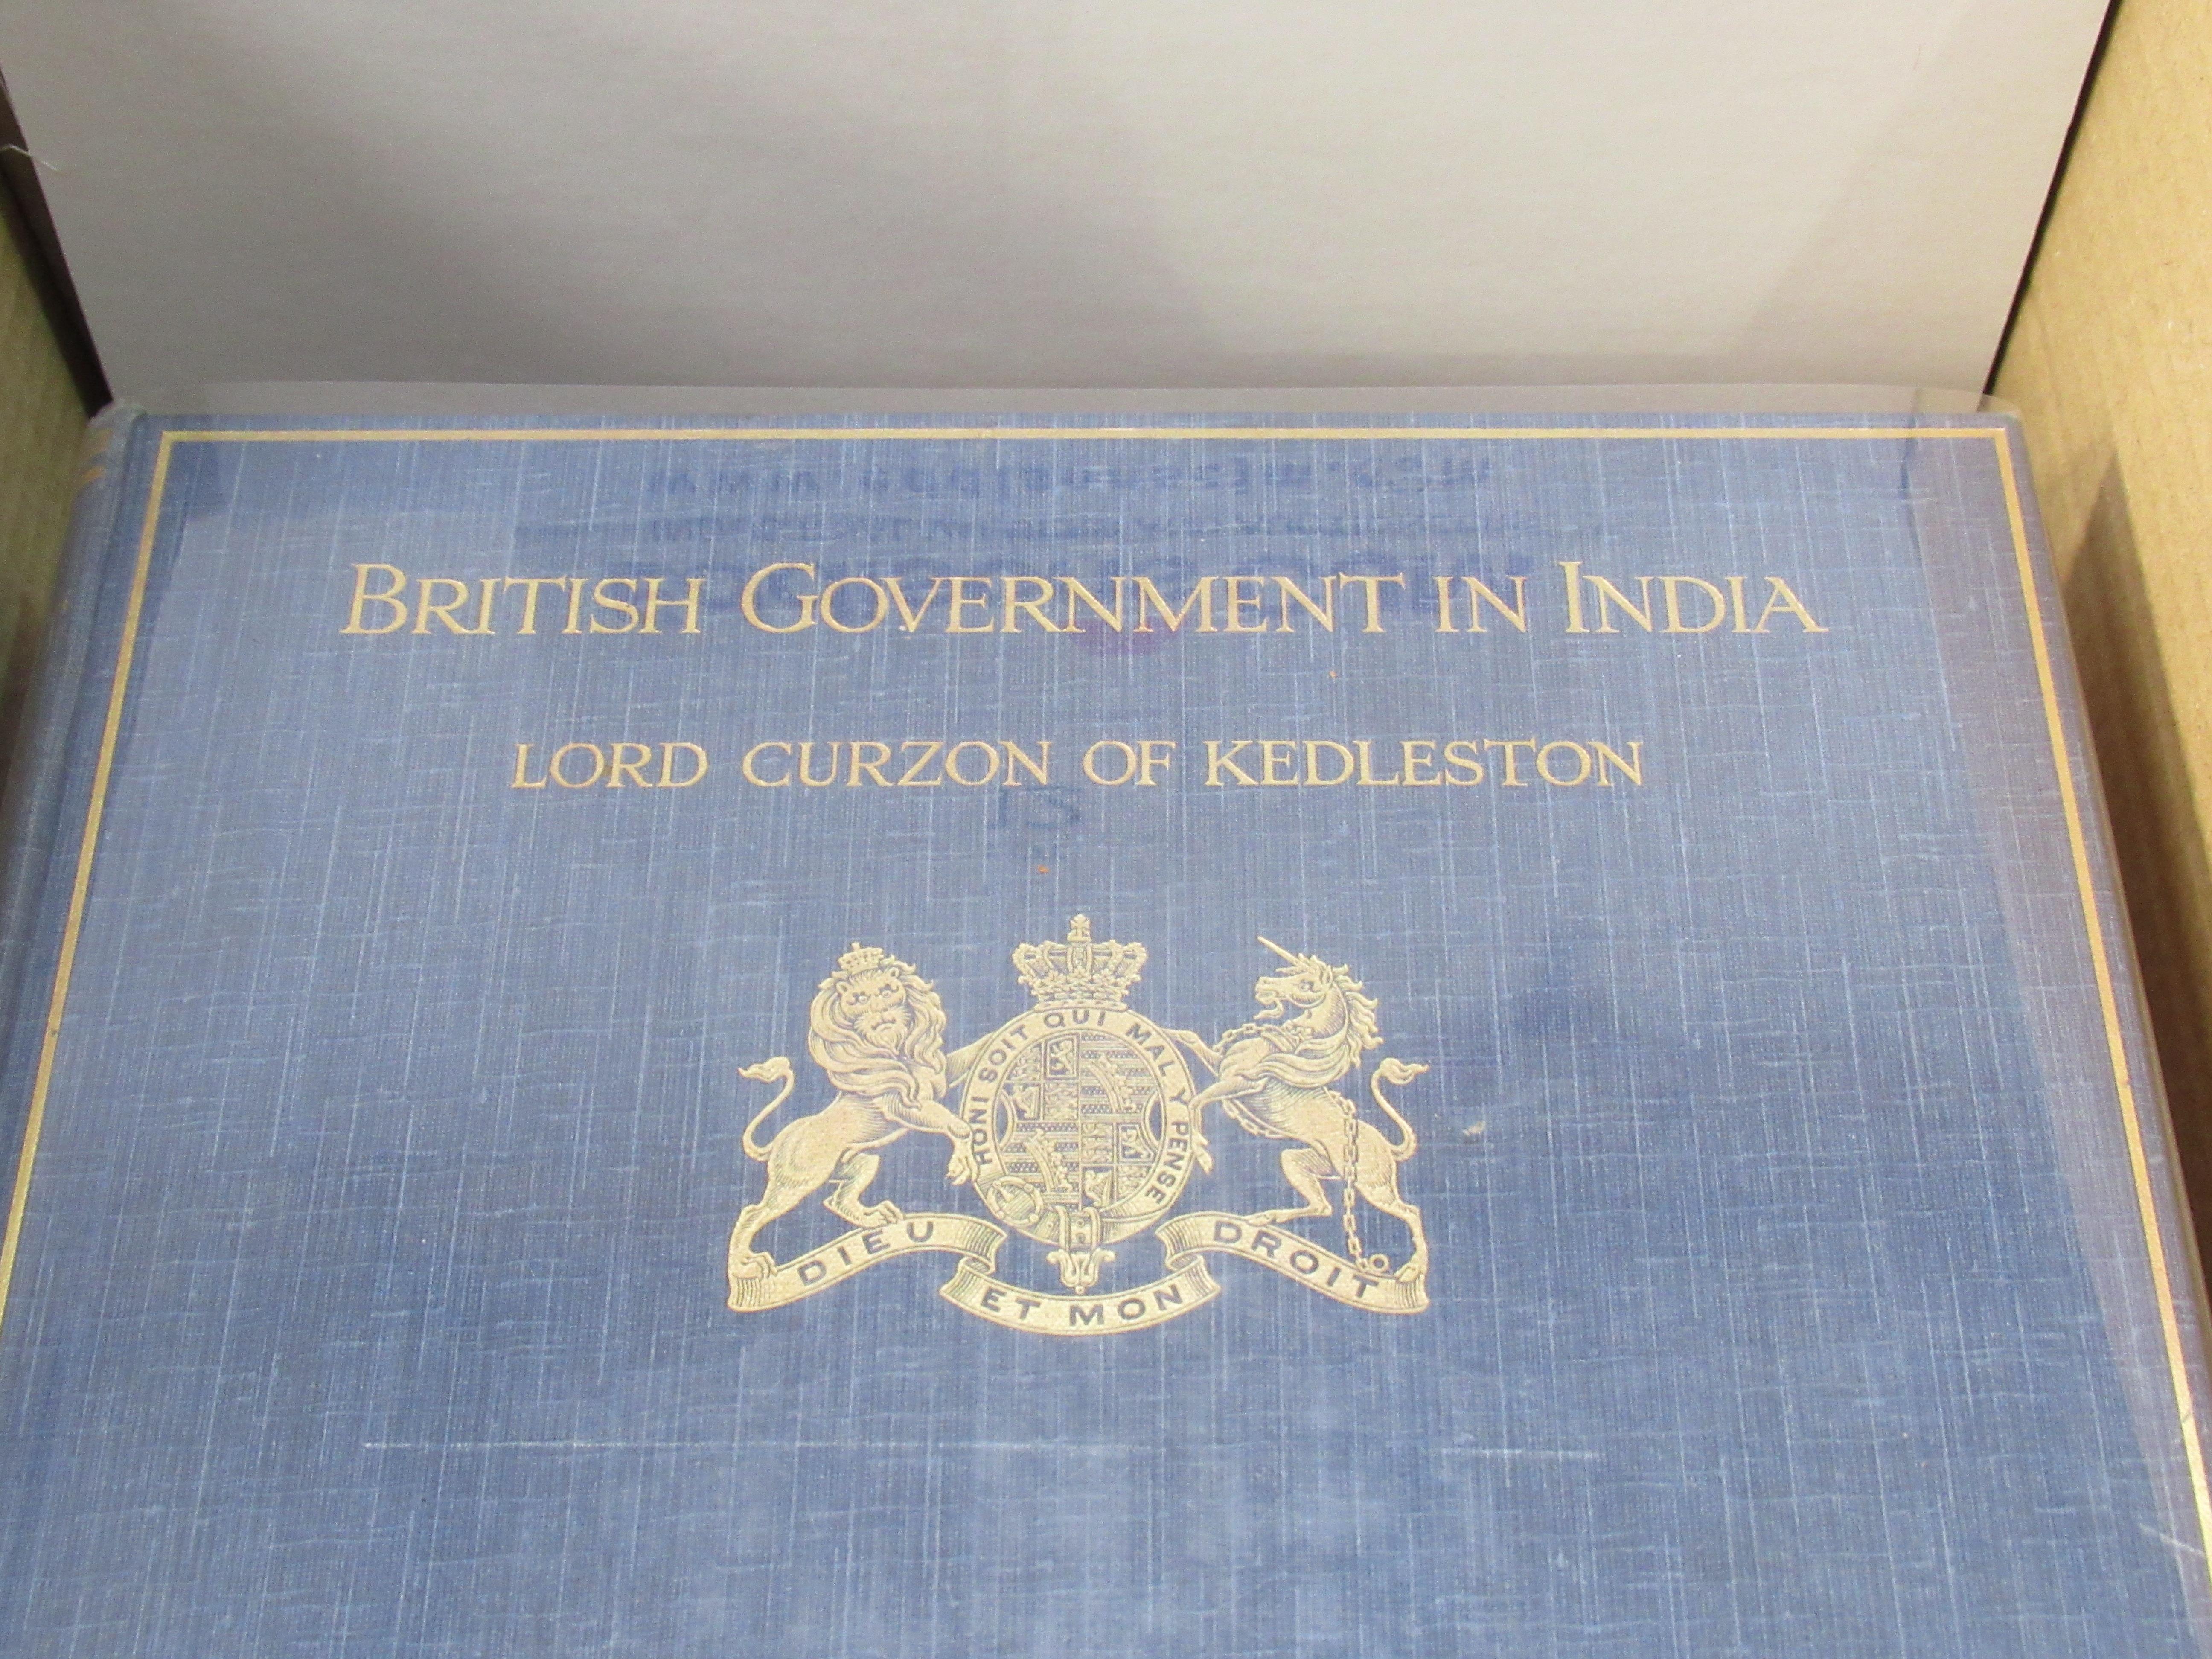 "British Government in India" Vols 1 & 2 by Lord Curzon of Keddlestone. First Published in 1925, Pub - Image 2 of 3